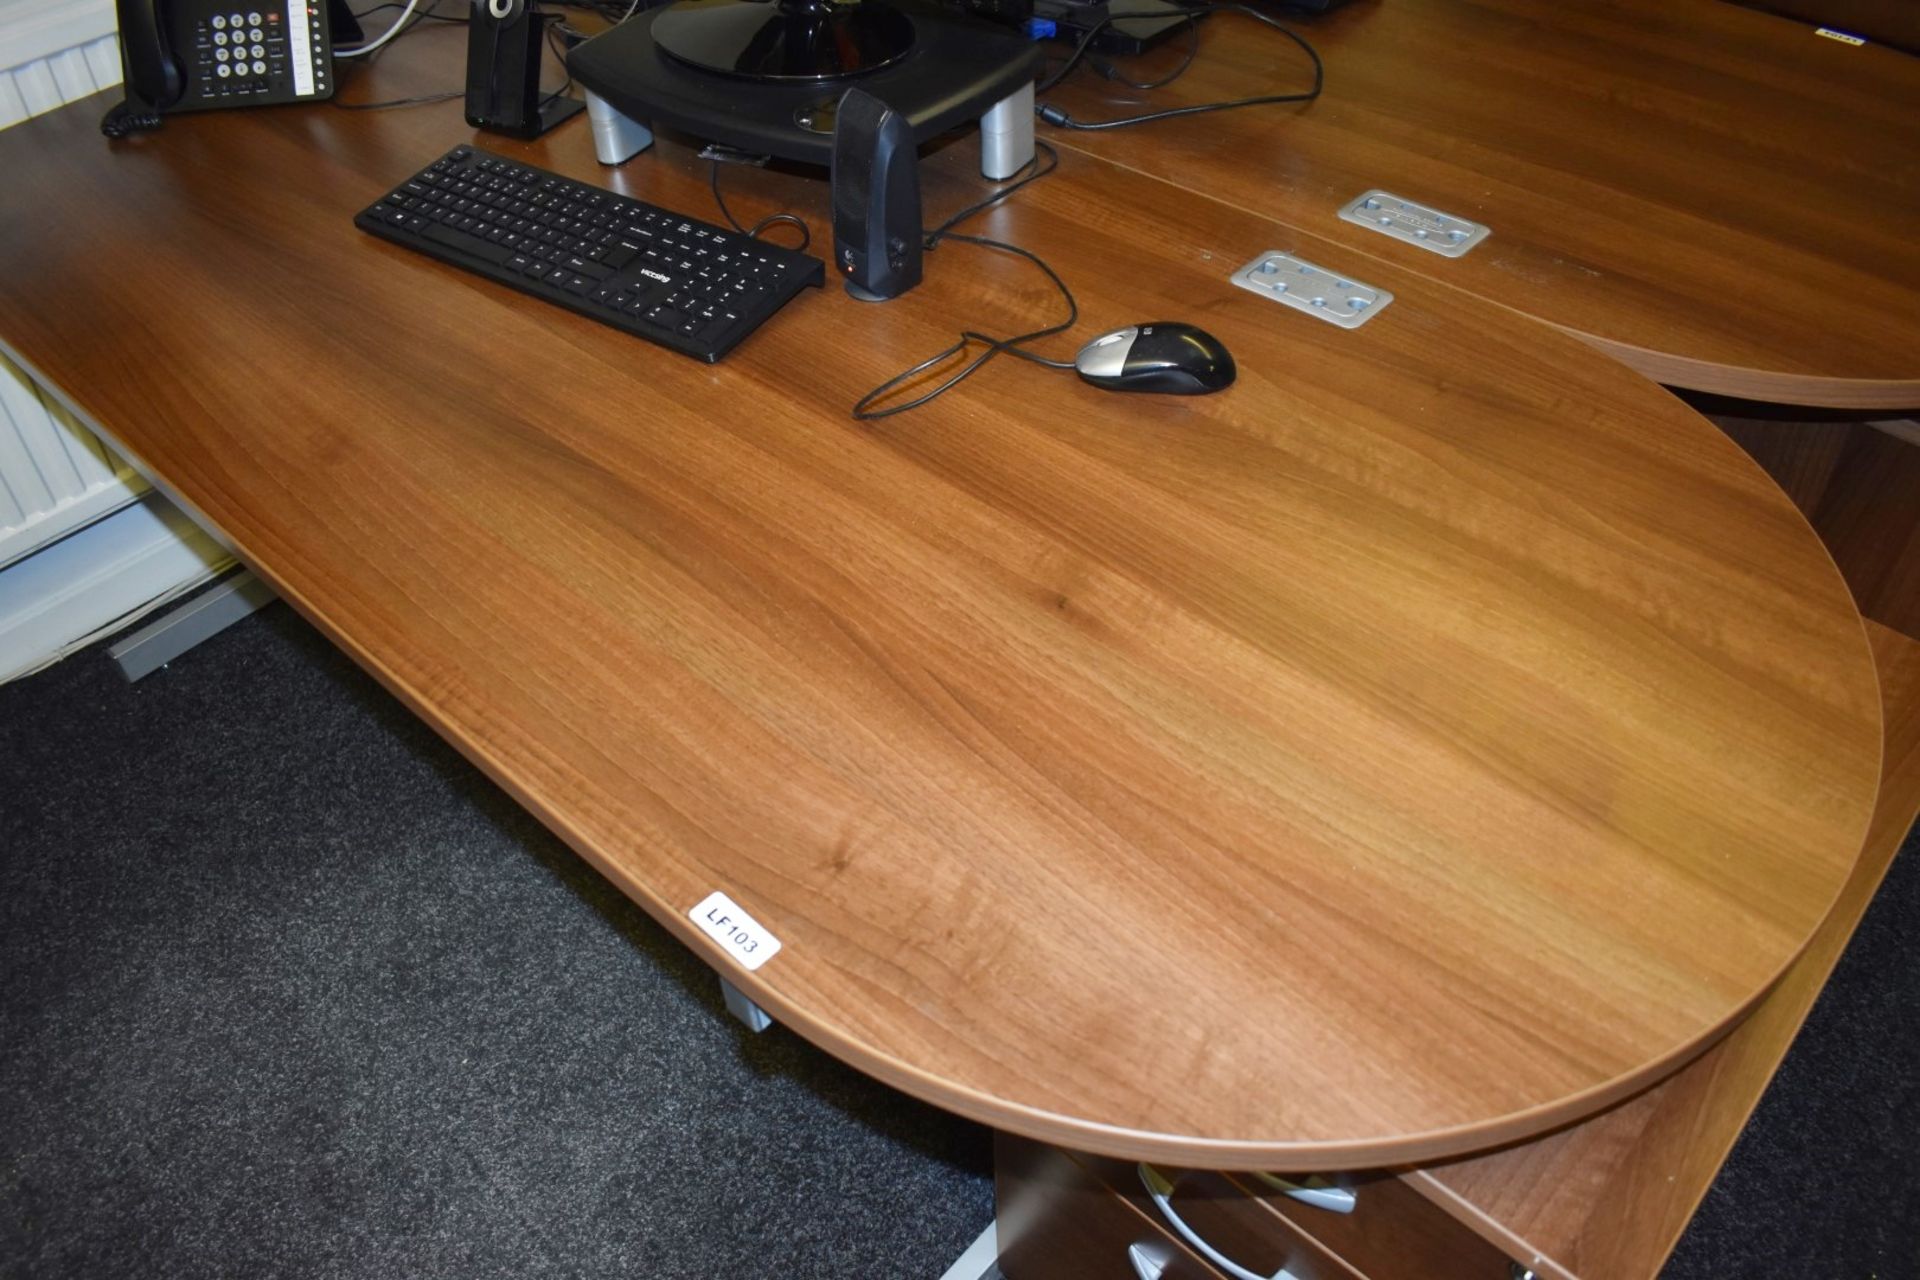 1 x Contemporary Office Desk - Features Semi Circle Meeting Point, Walnut Finish and Matching Drawer - Image 3 of 5